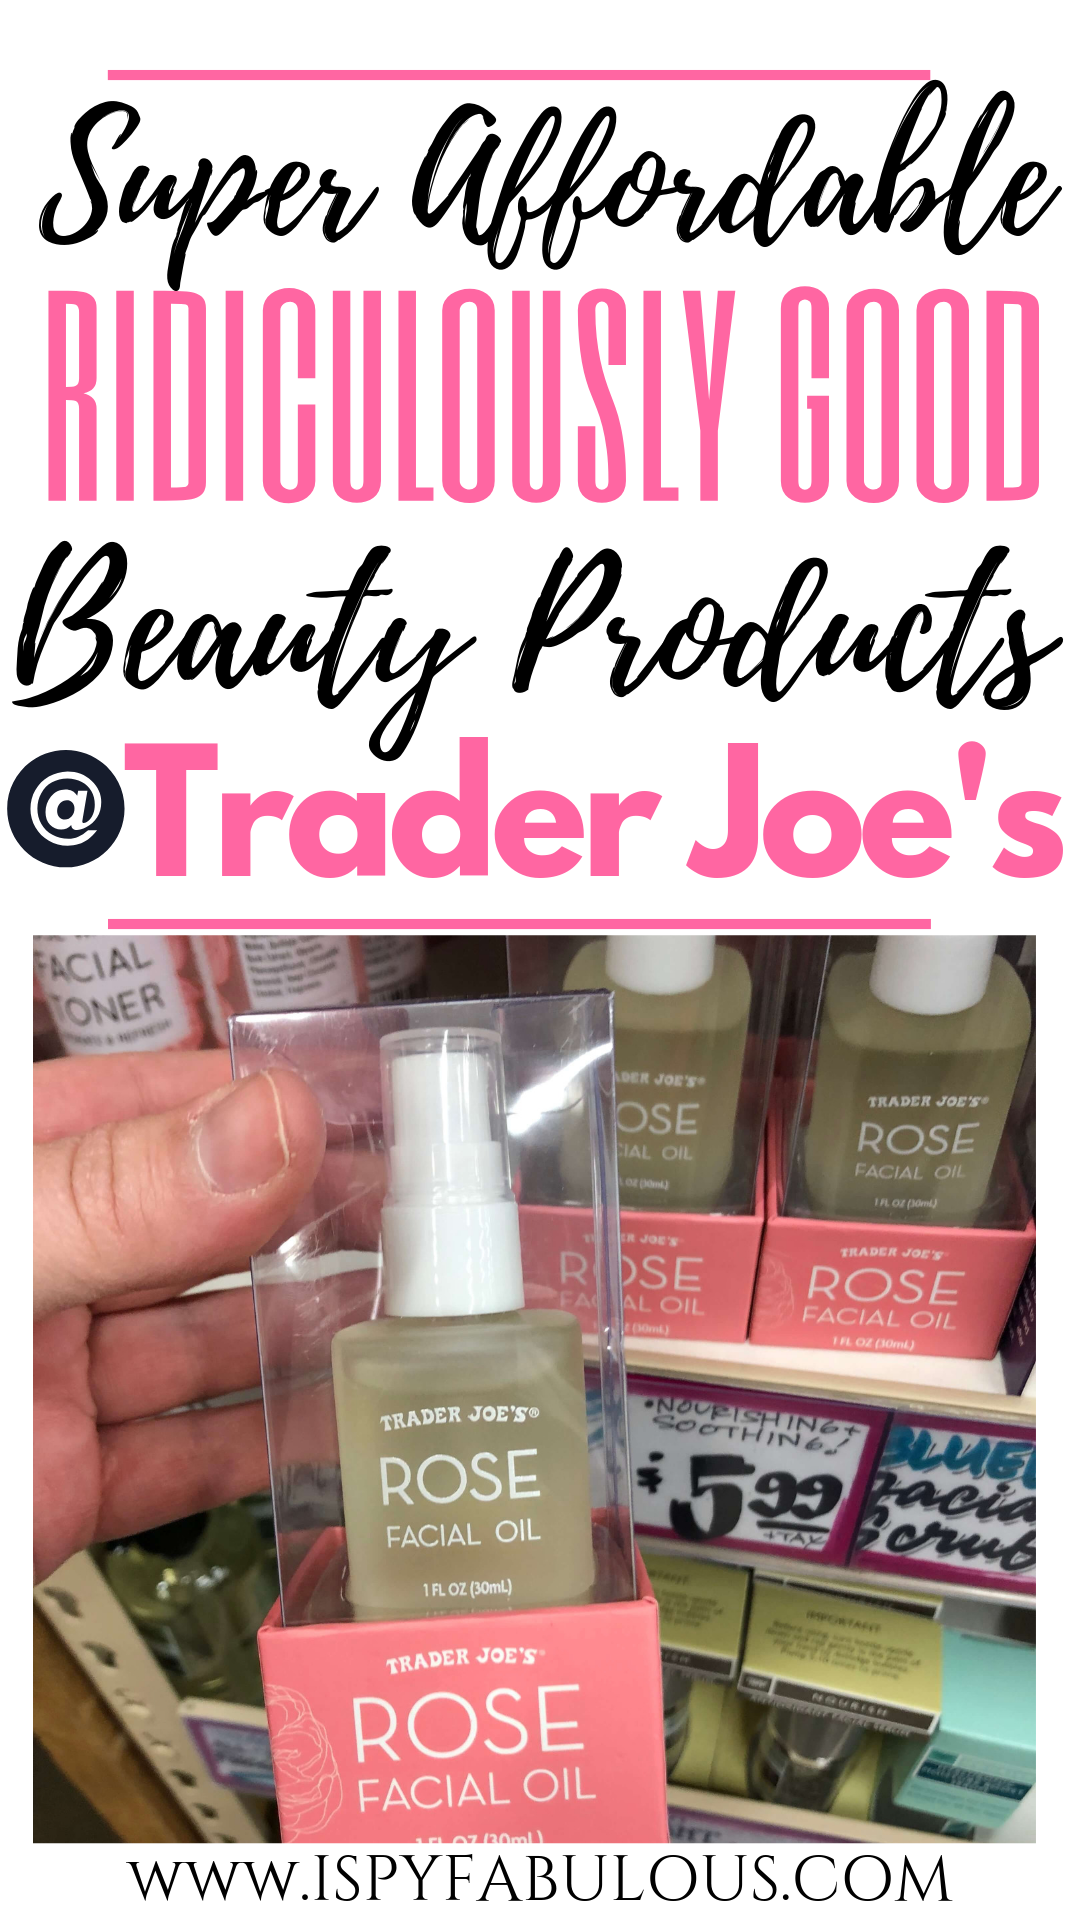 Super Affordable, Ridiculously Good Beauty Products from Trader Joe's! - Super Affordable, Ridiculously Good Beauty Products from Trader Joe's! -   14 beauty Care products ideas